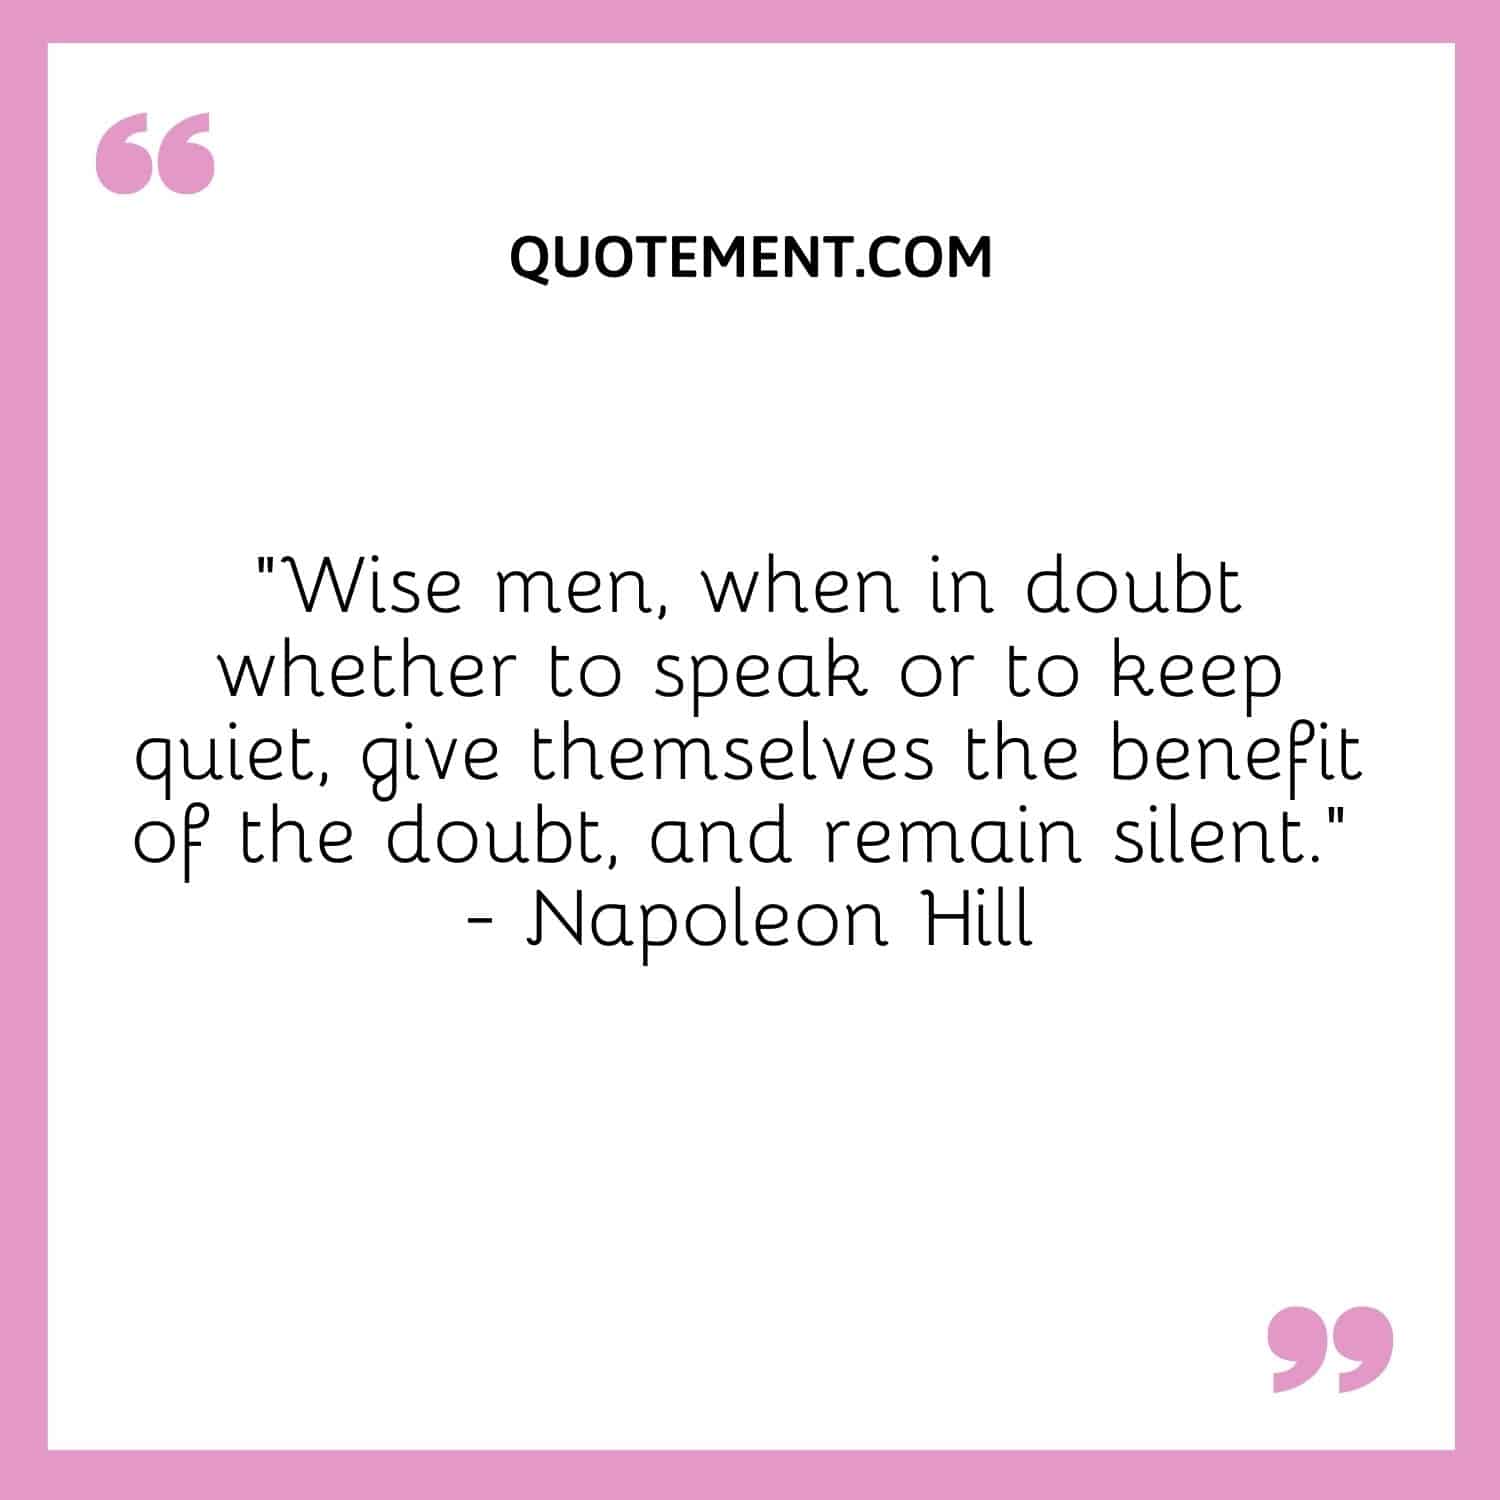 “Wise men, when in doubt whether to speak or to keep quiet, give themselves the benefit of the doubt, and remain silent.” — Napoleon Hill